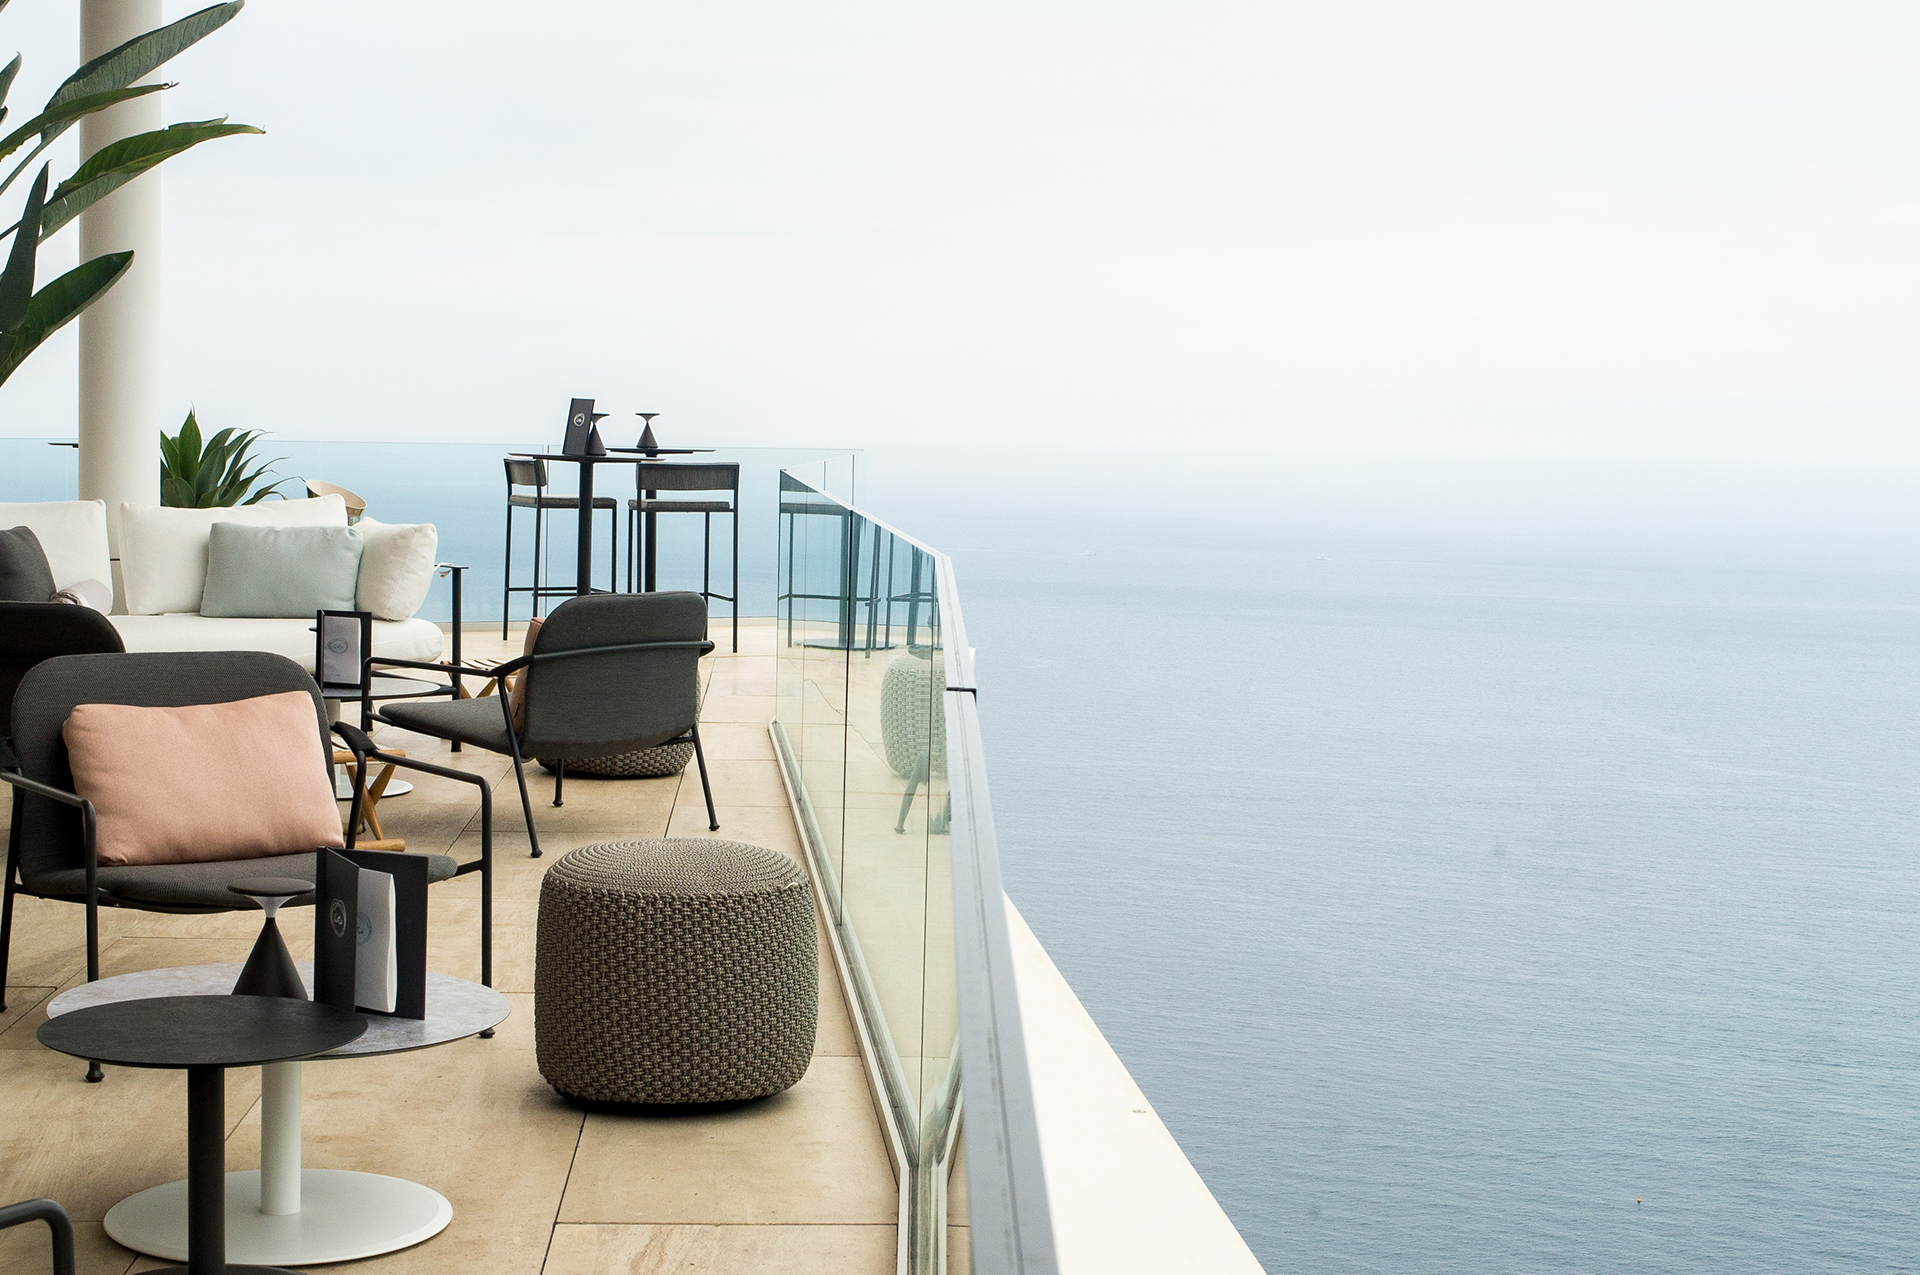 Bar Ceto at The Maybourne Riviera - terrace with lounge chairs, high chairs and sofa and view onto the sea.